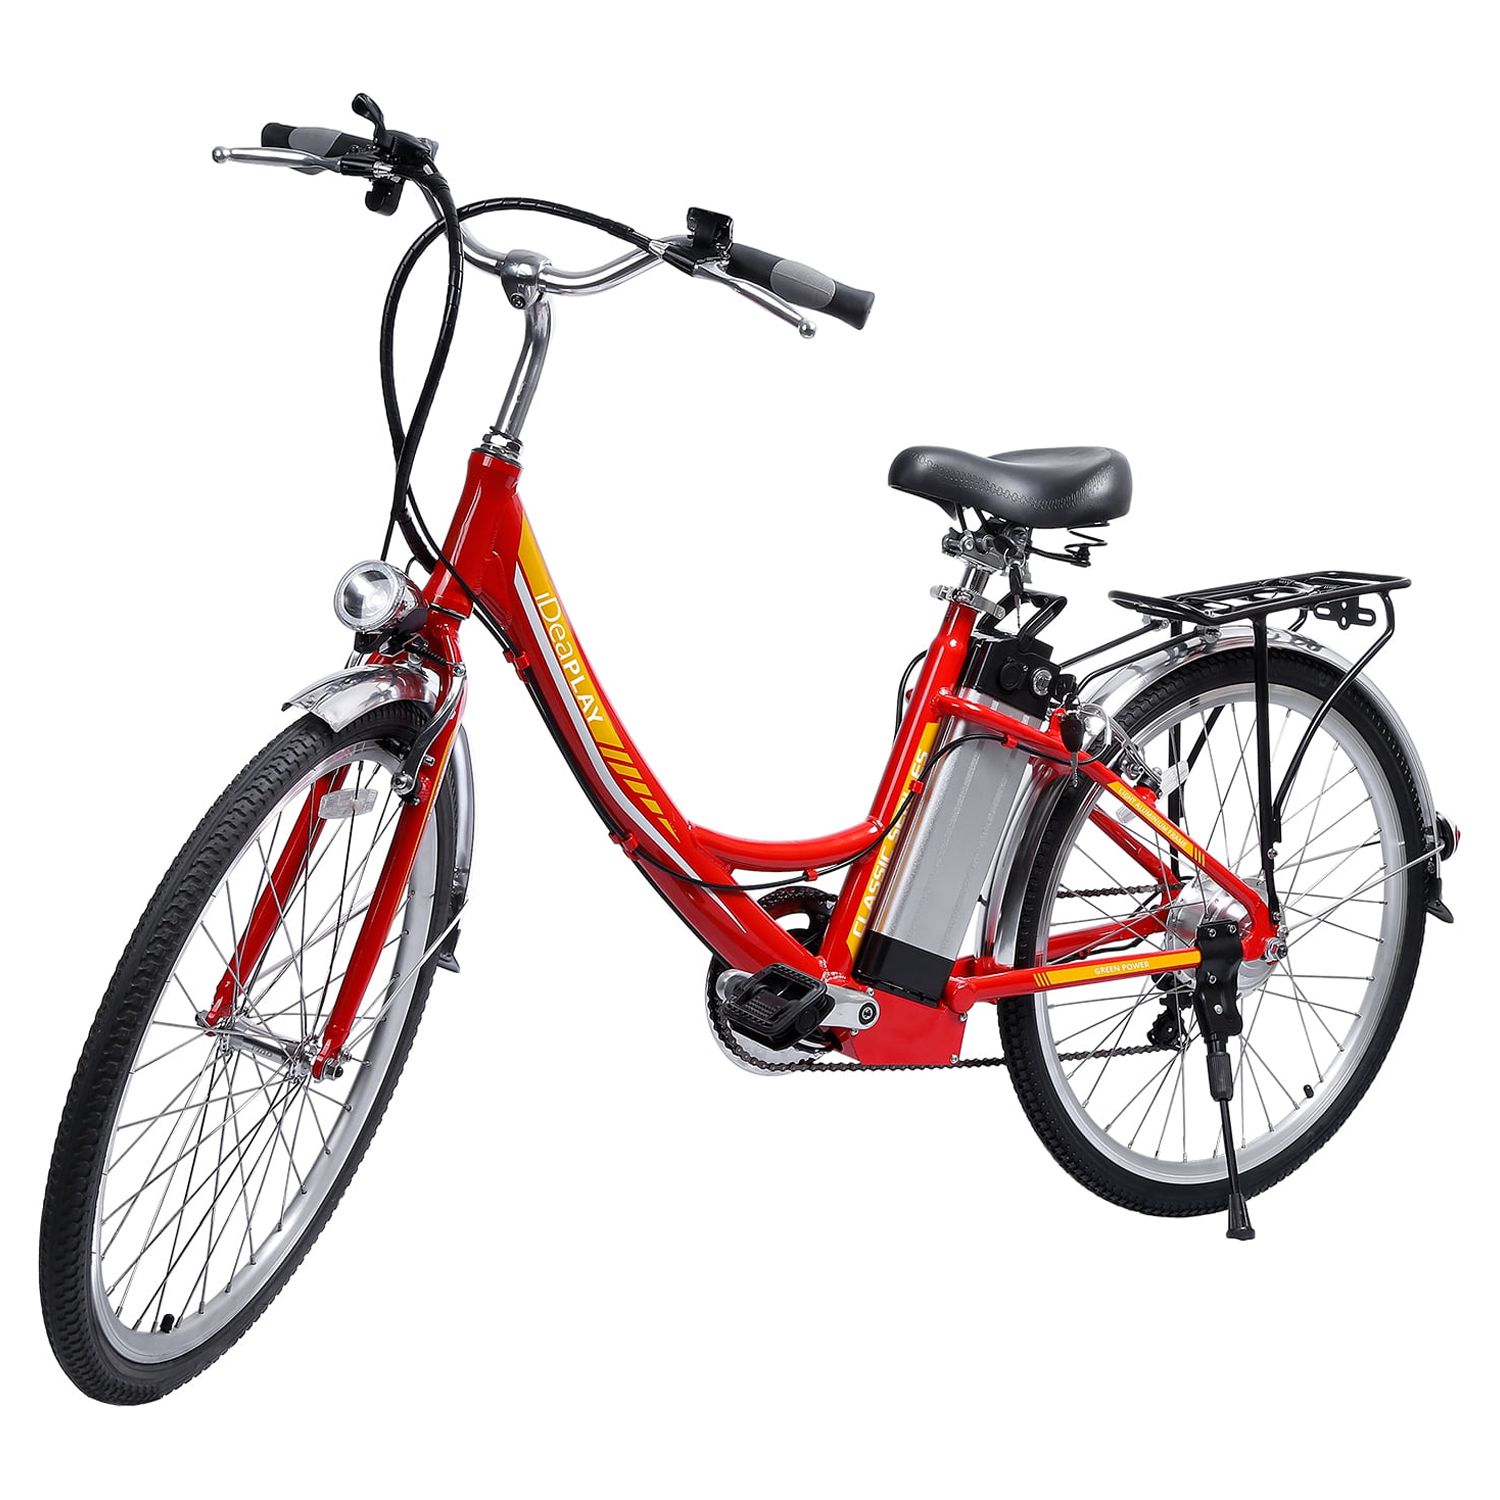 Ideaplay 24" Women's E-Bike - Red - image 1 of 9